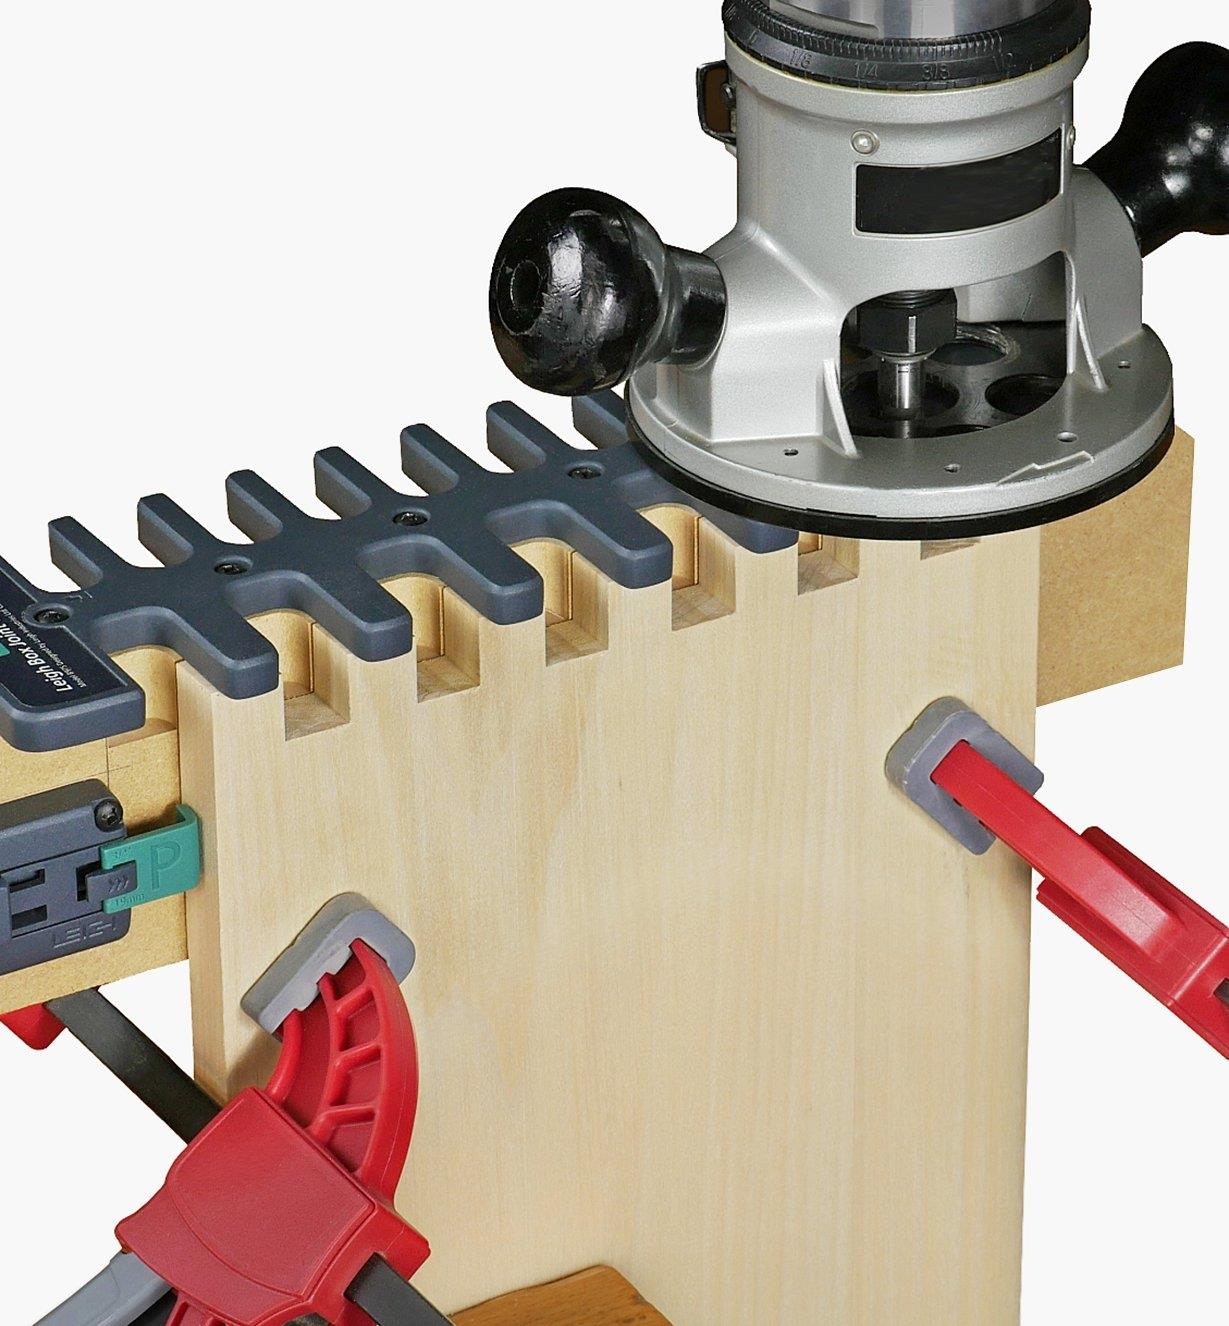 Freehand routing box joints using the Leigh jig